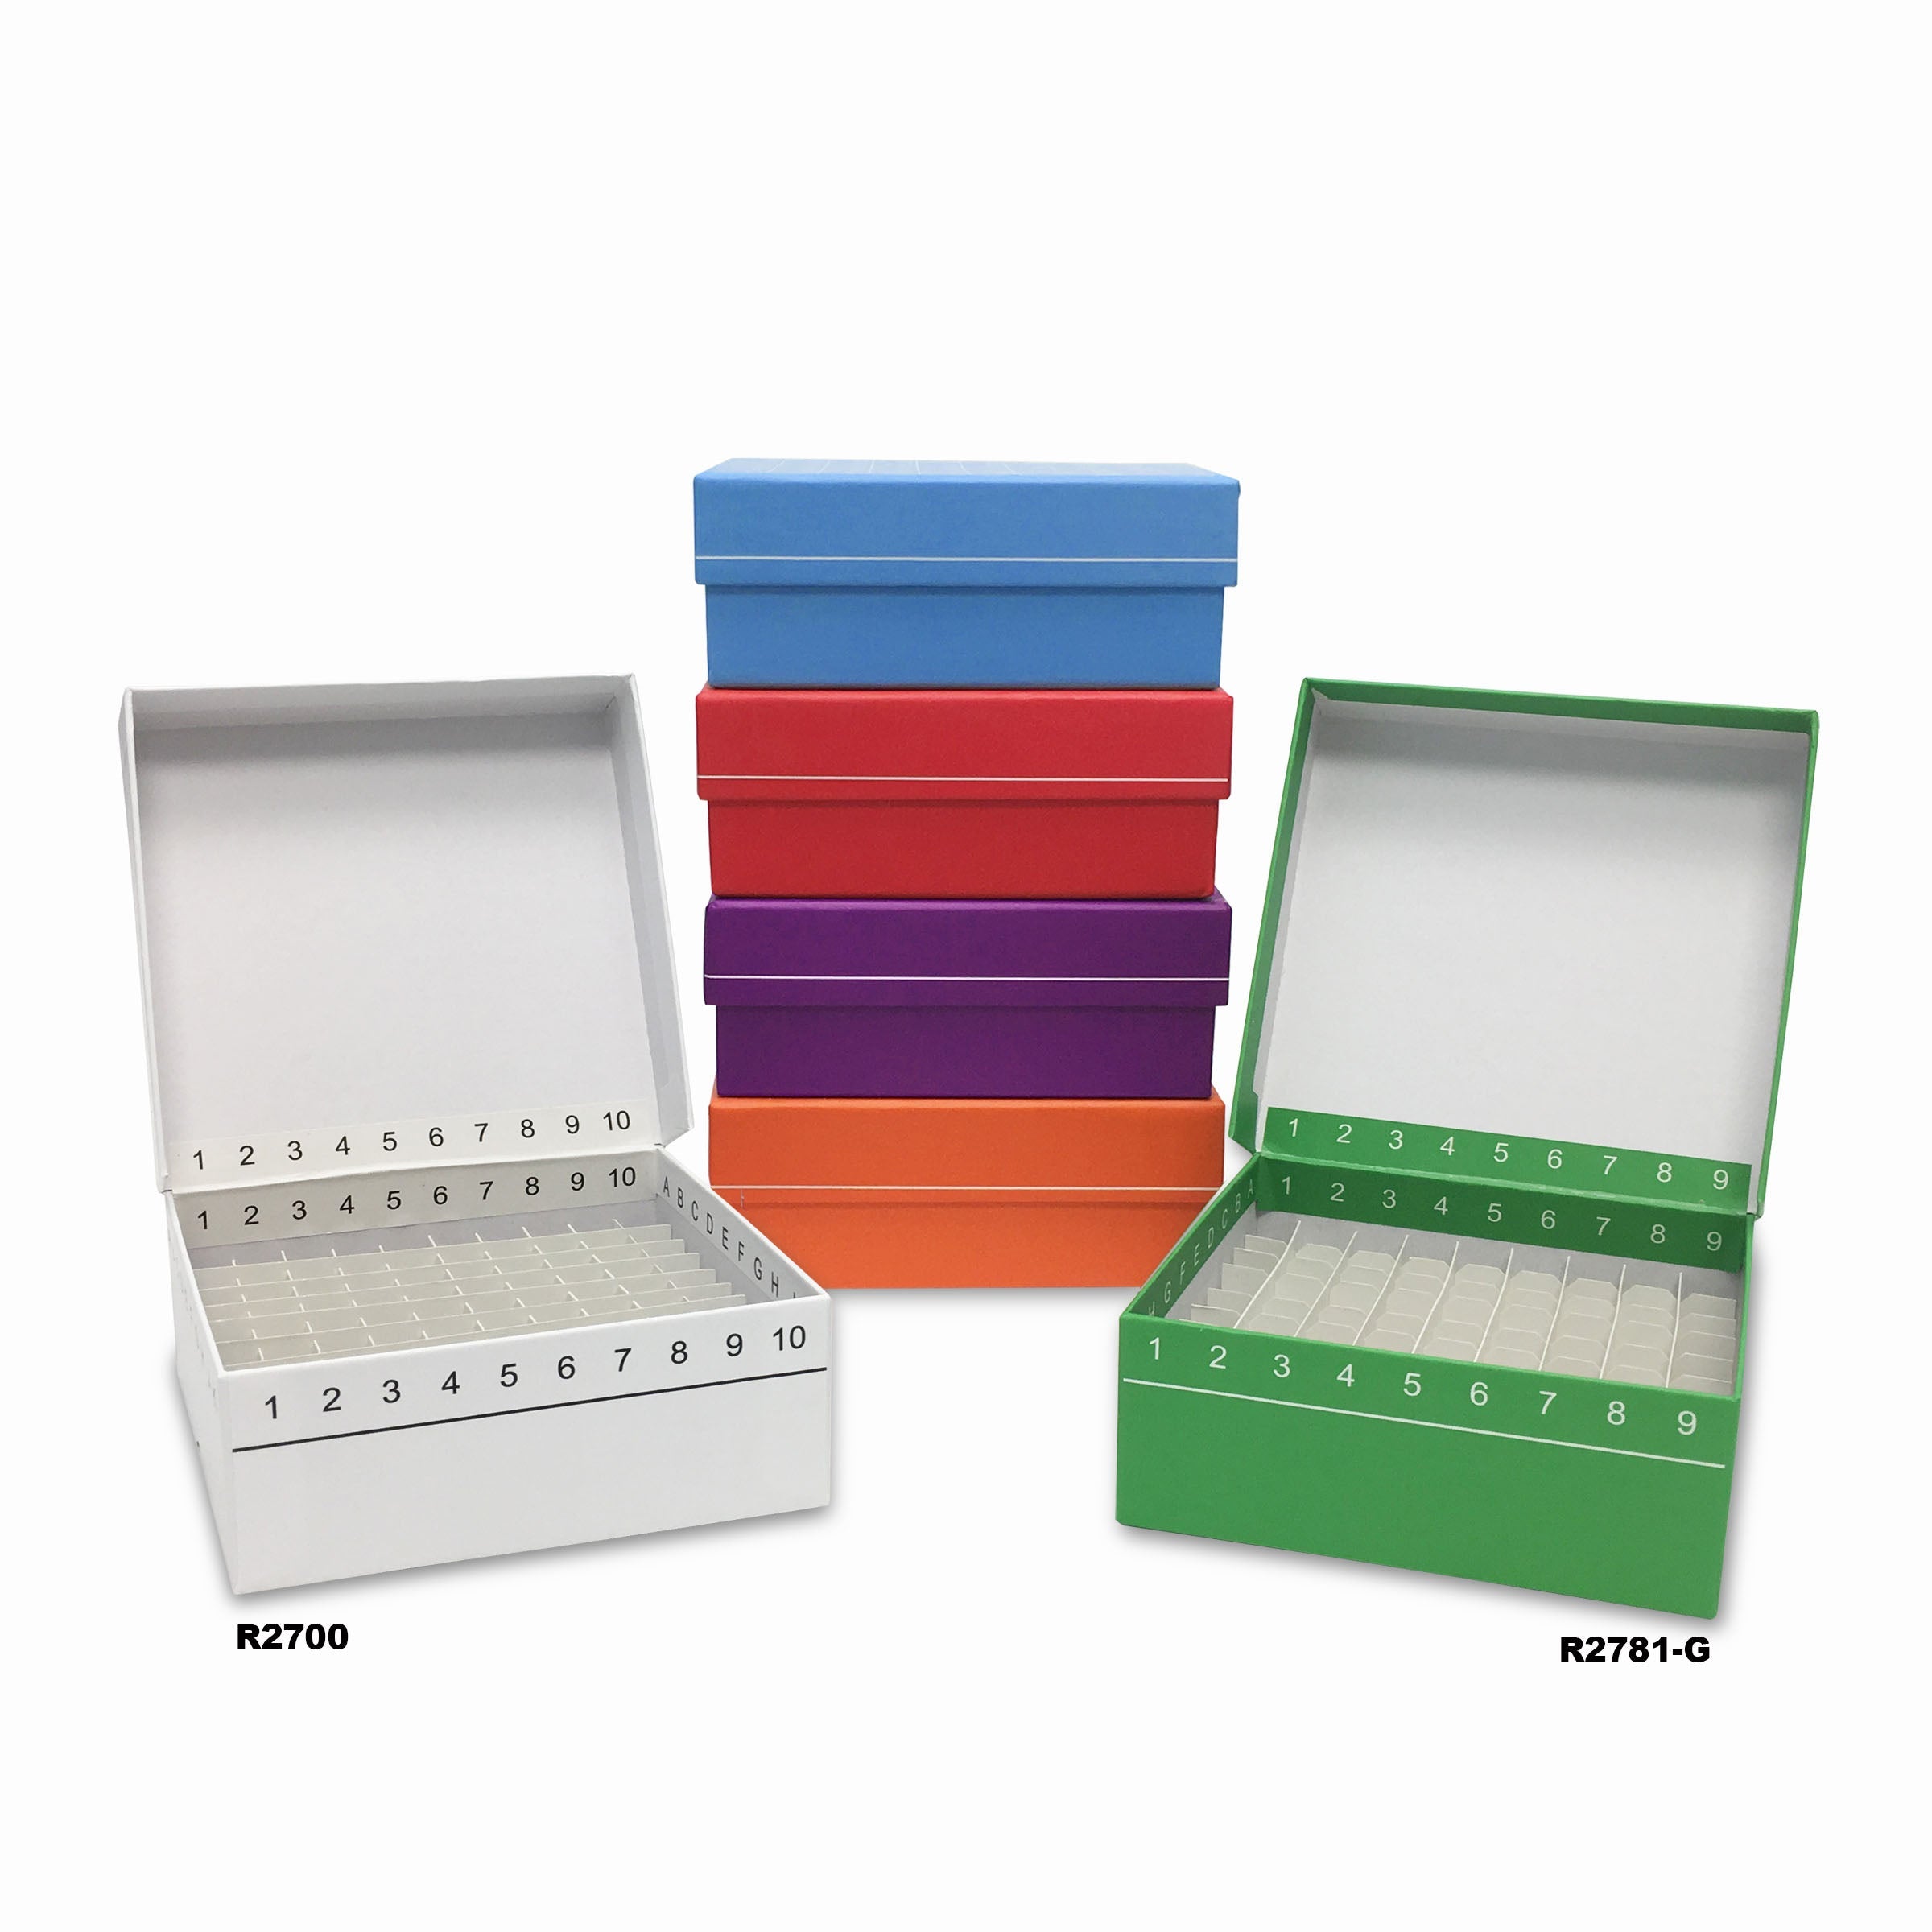 MTC Bio R2781-P, Fliptop Carboard Freezer Box with Attached Hinged Lid, 81-Place, Purple, 5/pk